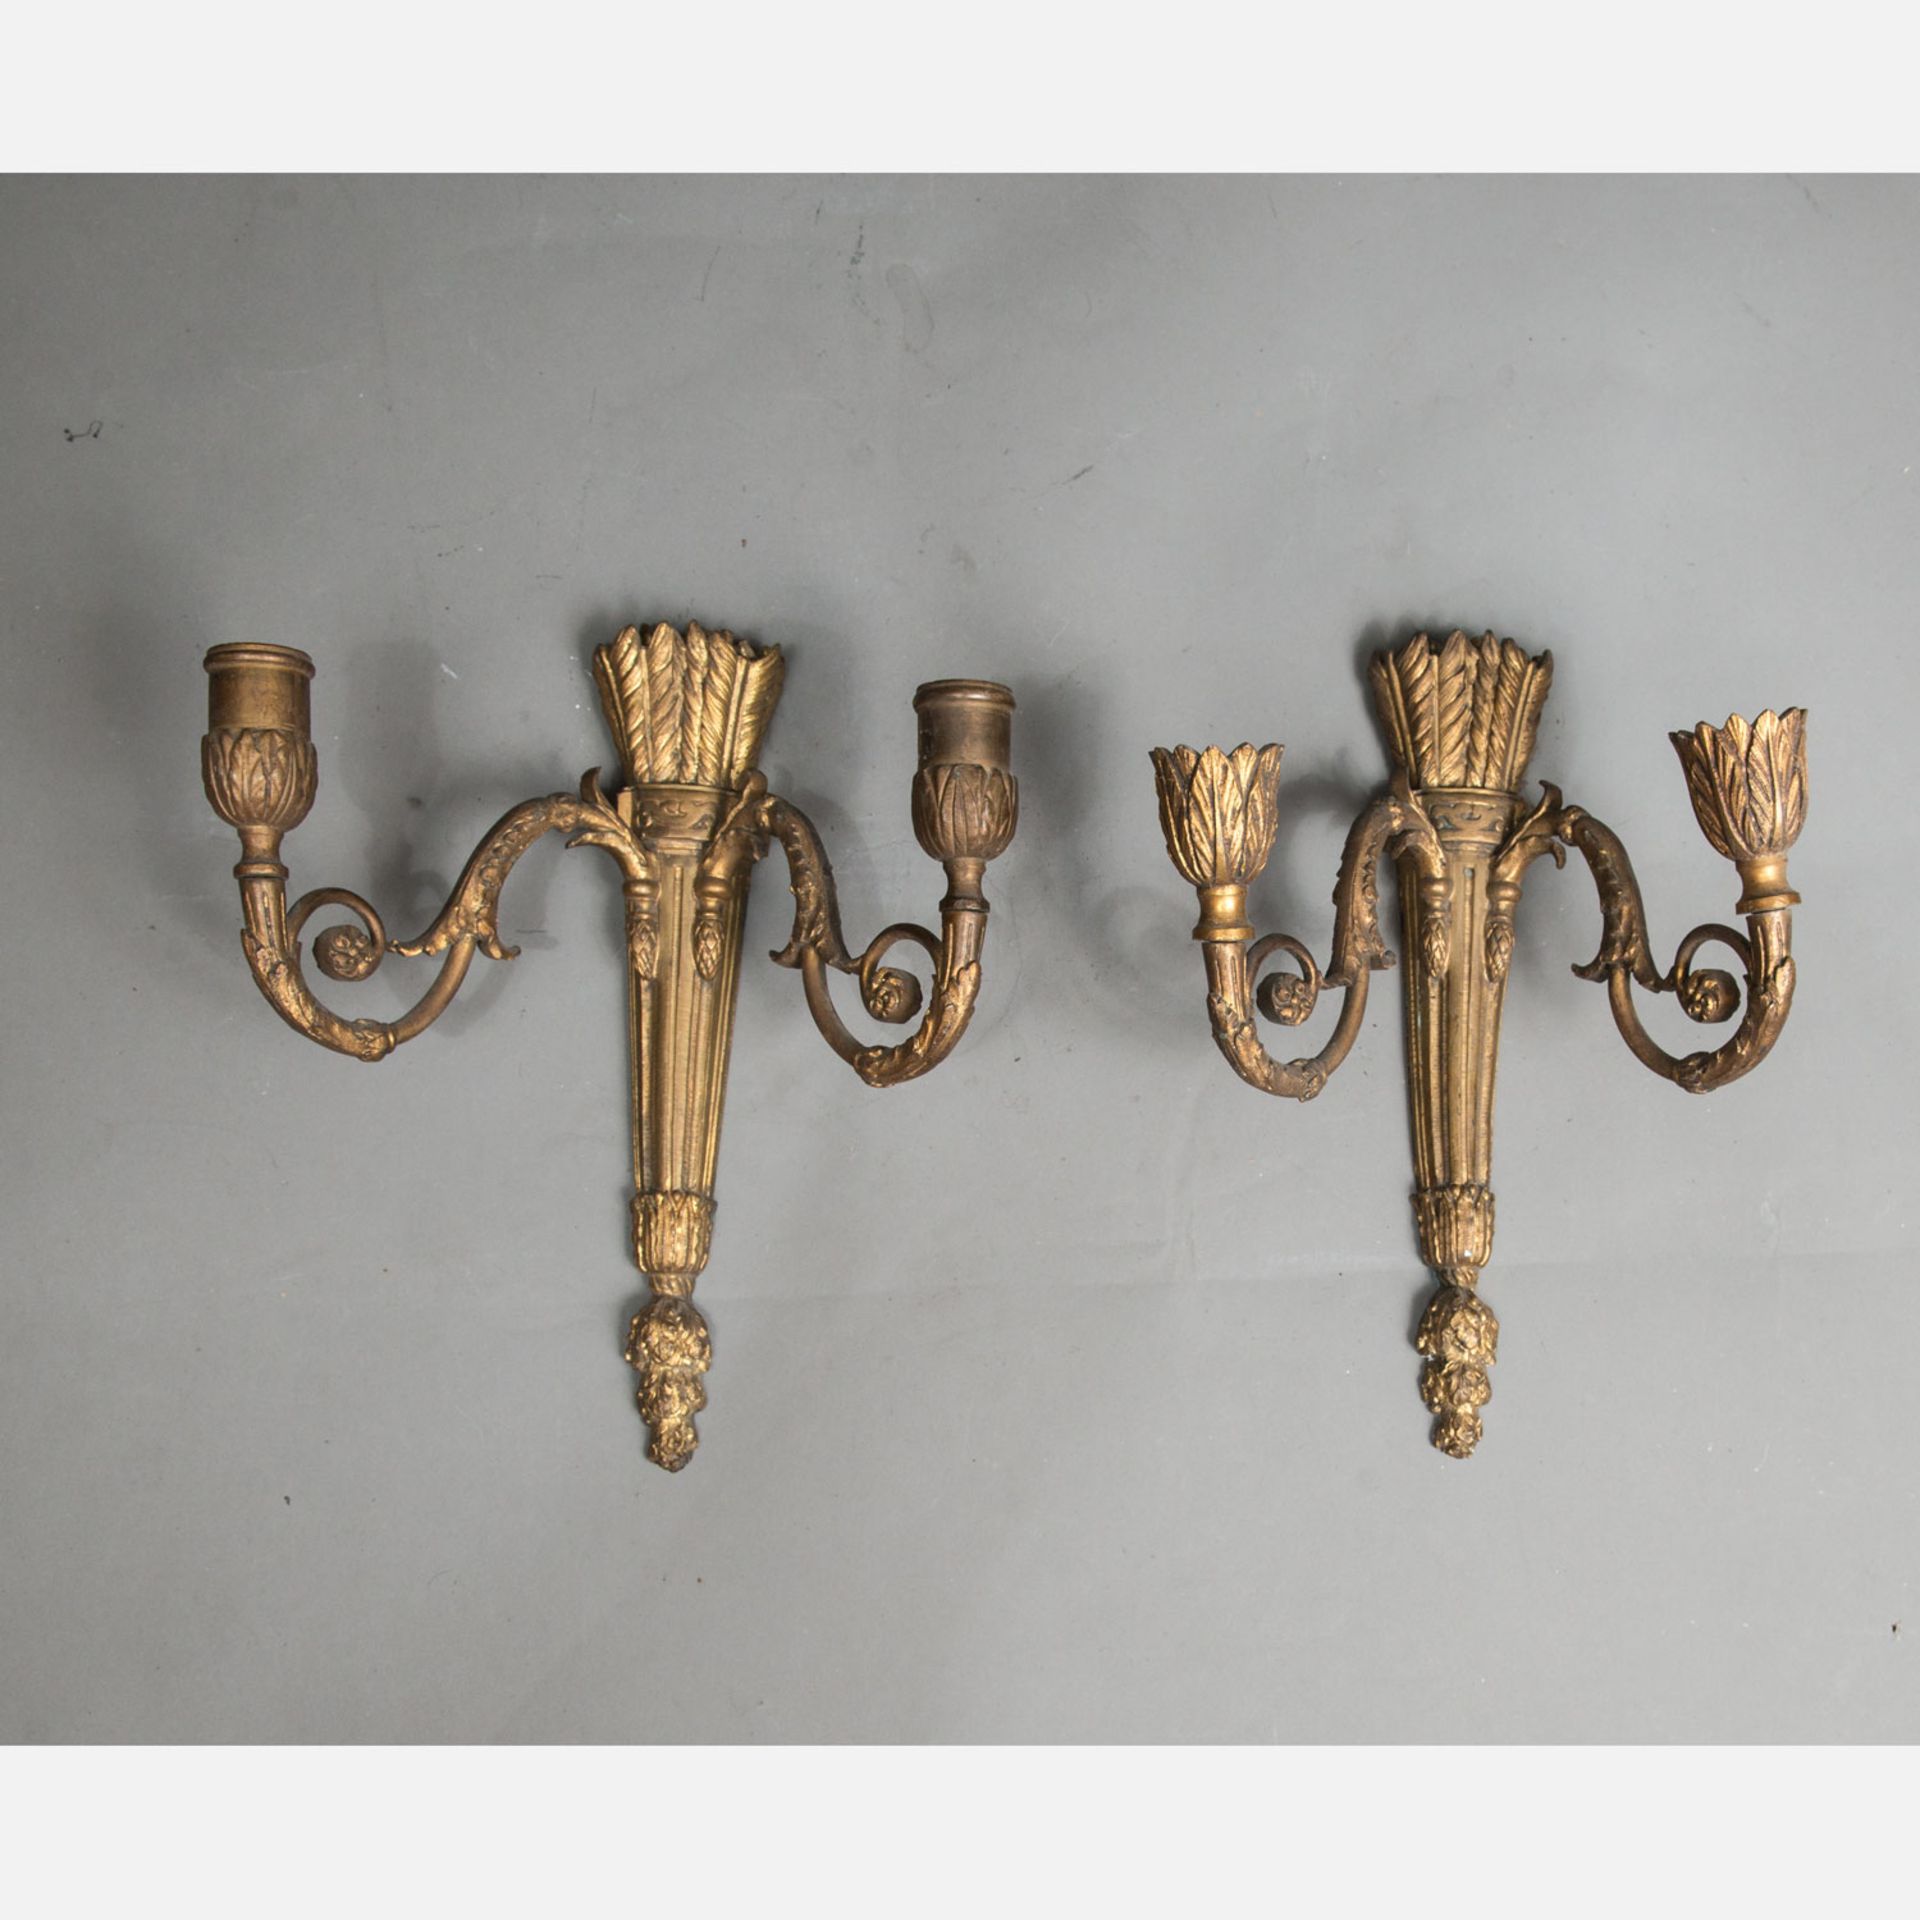 Pair of French Wall Apliques - Image 2 of 4